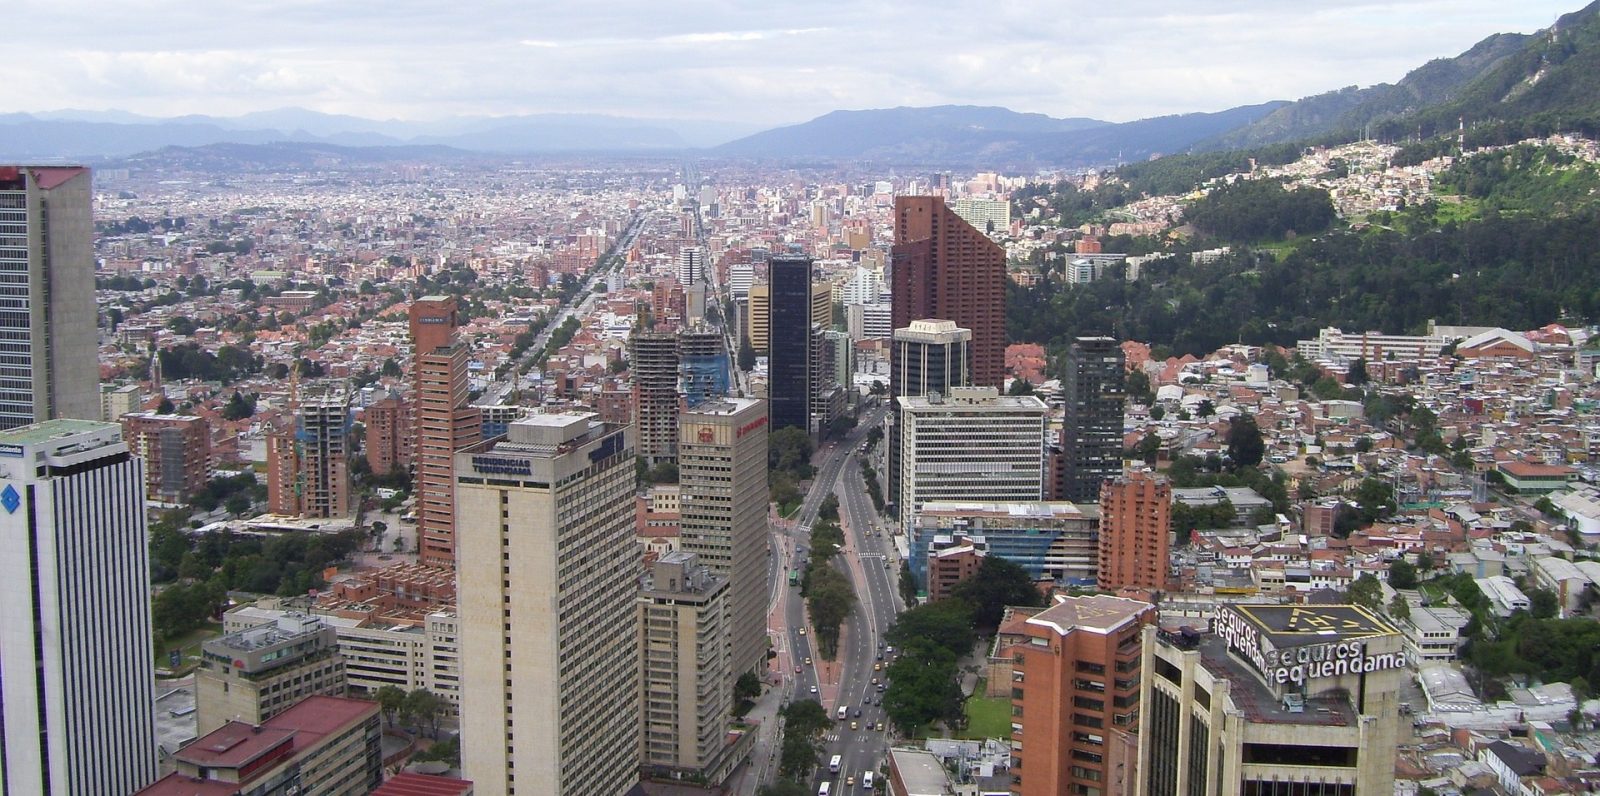 Bogotá, Colombia will add nearly 600 electric buses next year